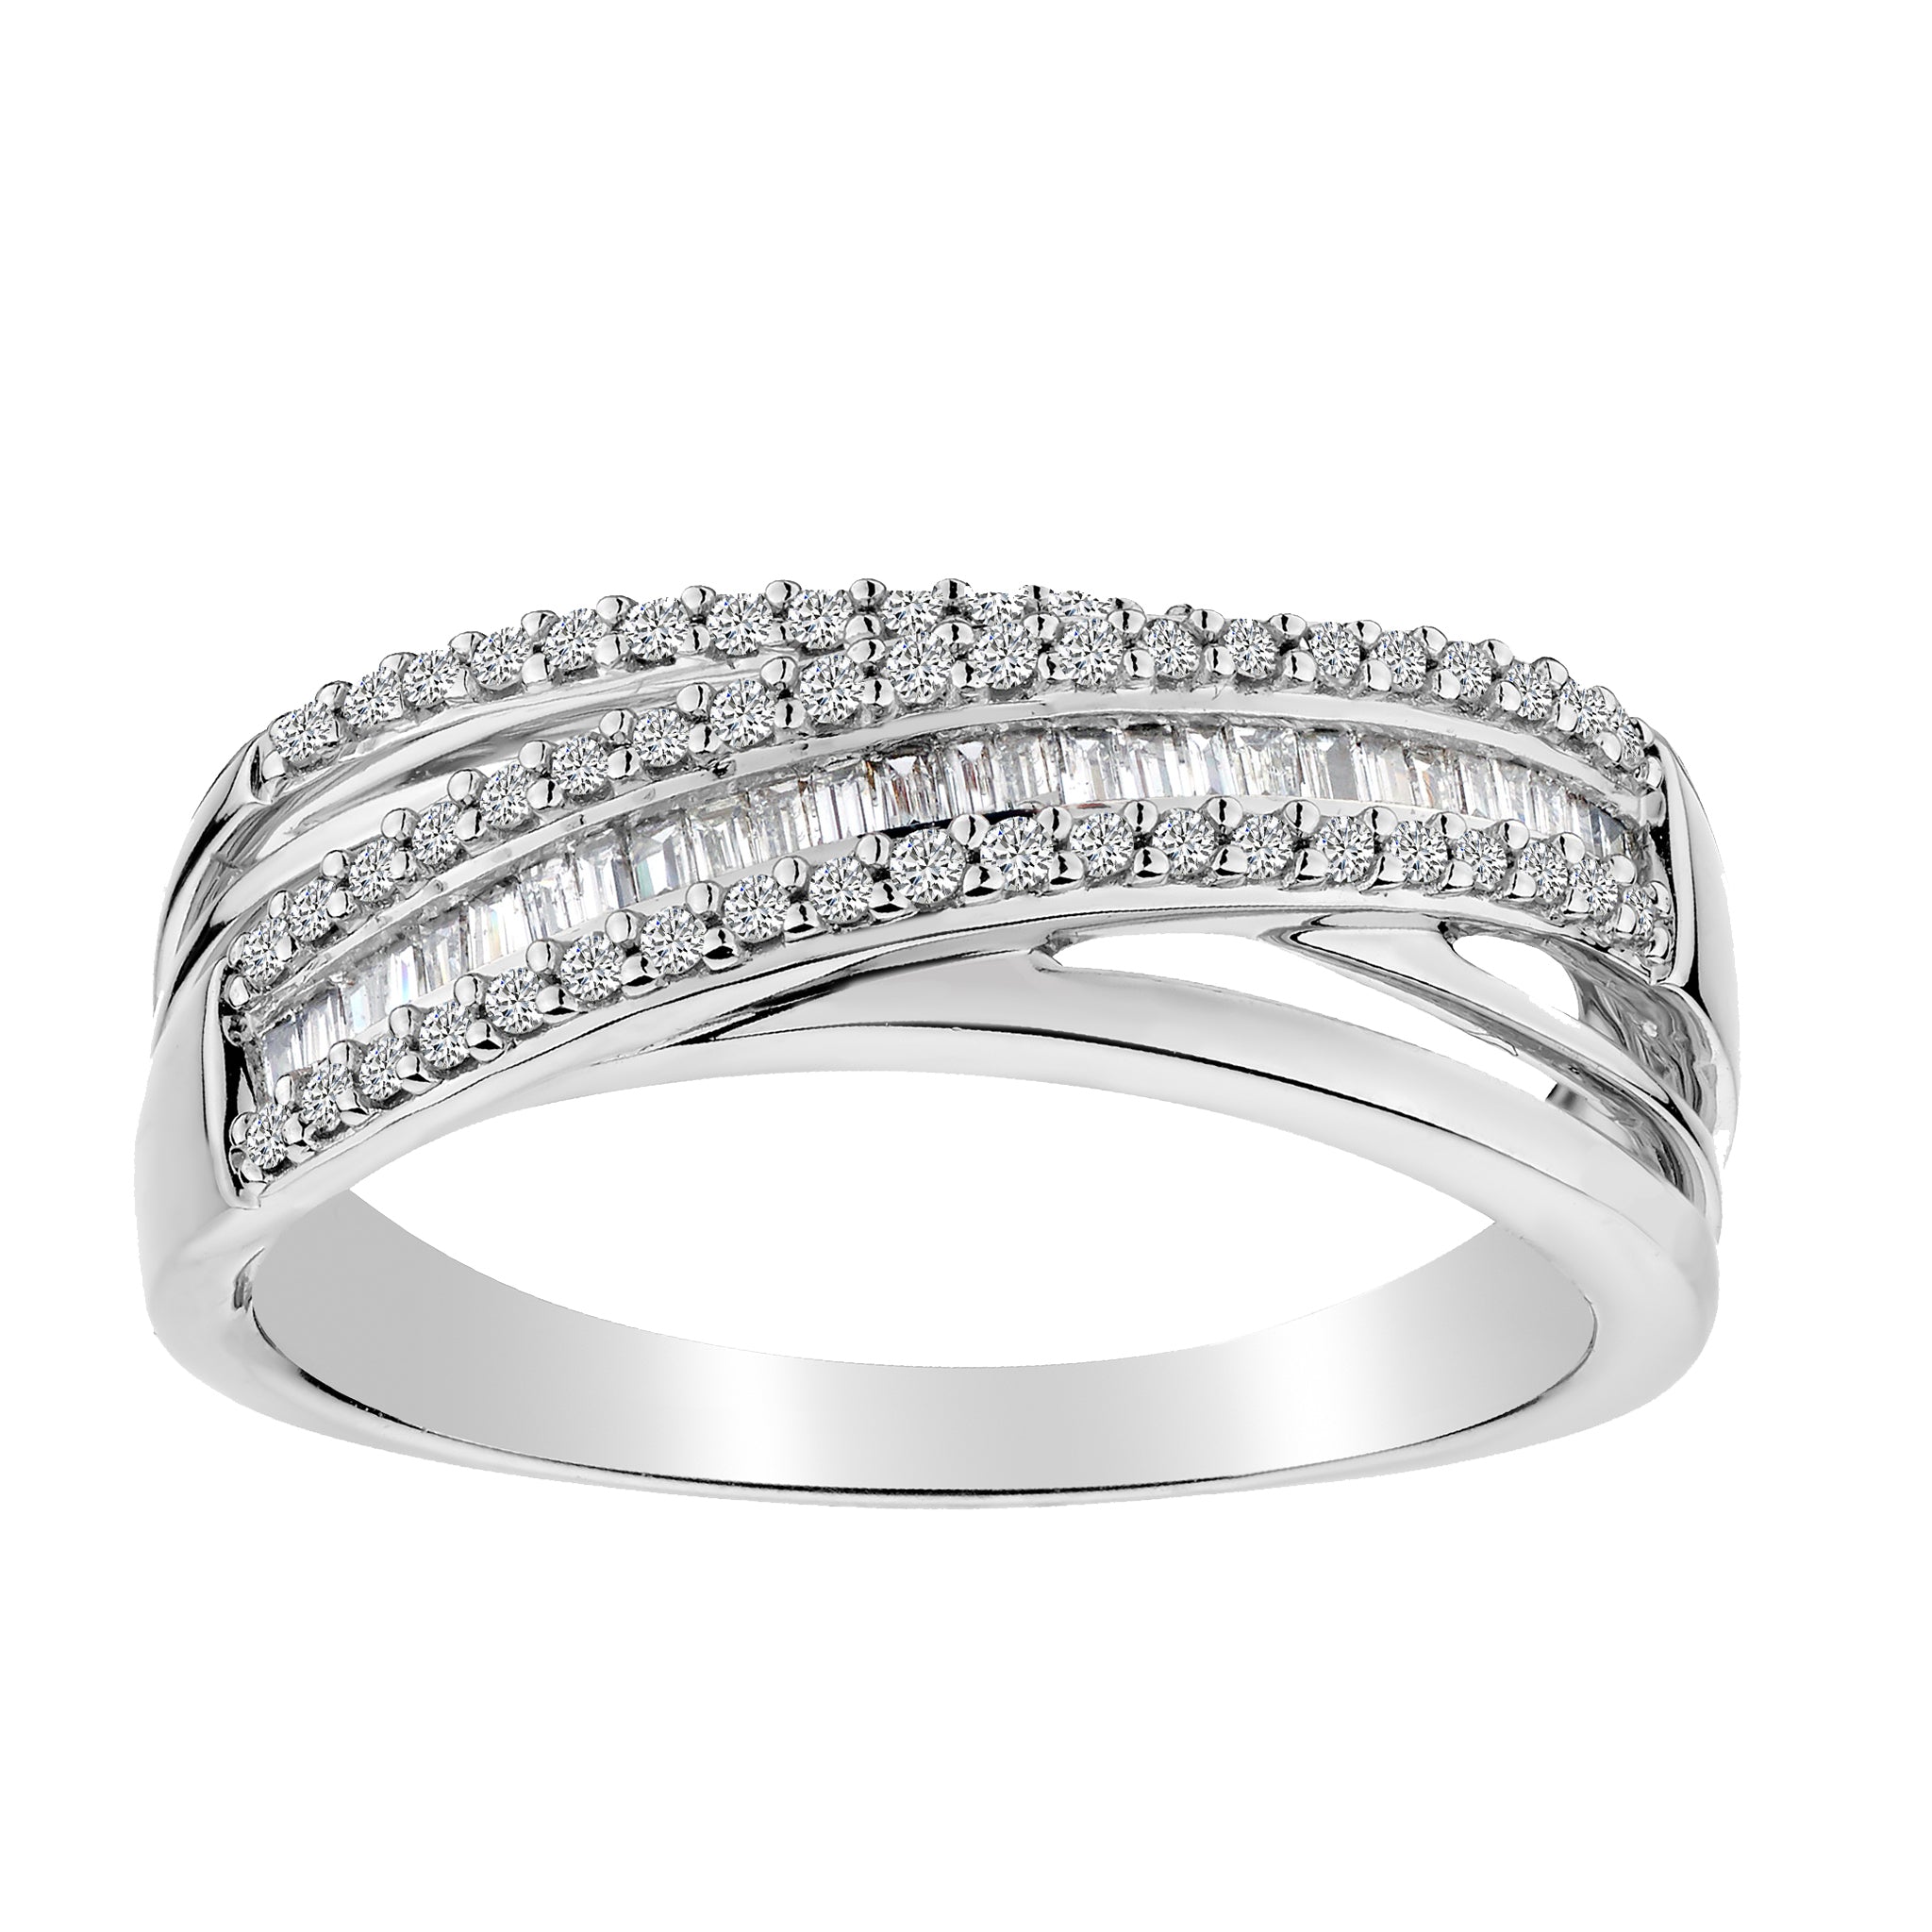 .25 CARAT DIAMOND RING, 10kt WHITE GOLD. Fashion Rings - Griffin Jewellery Designs